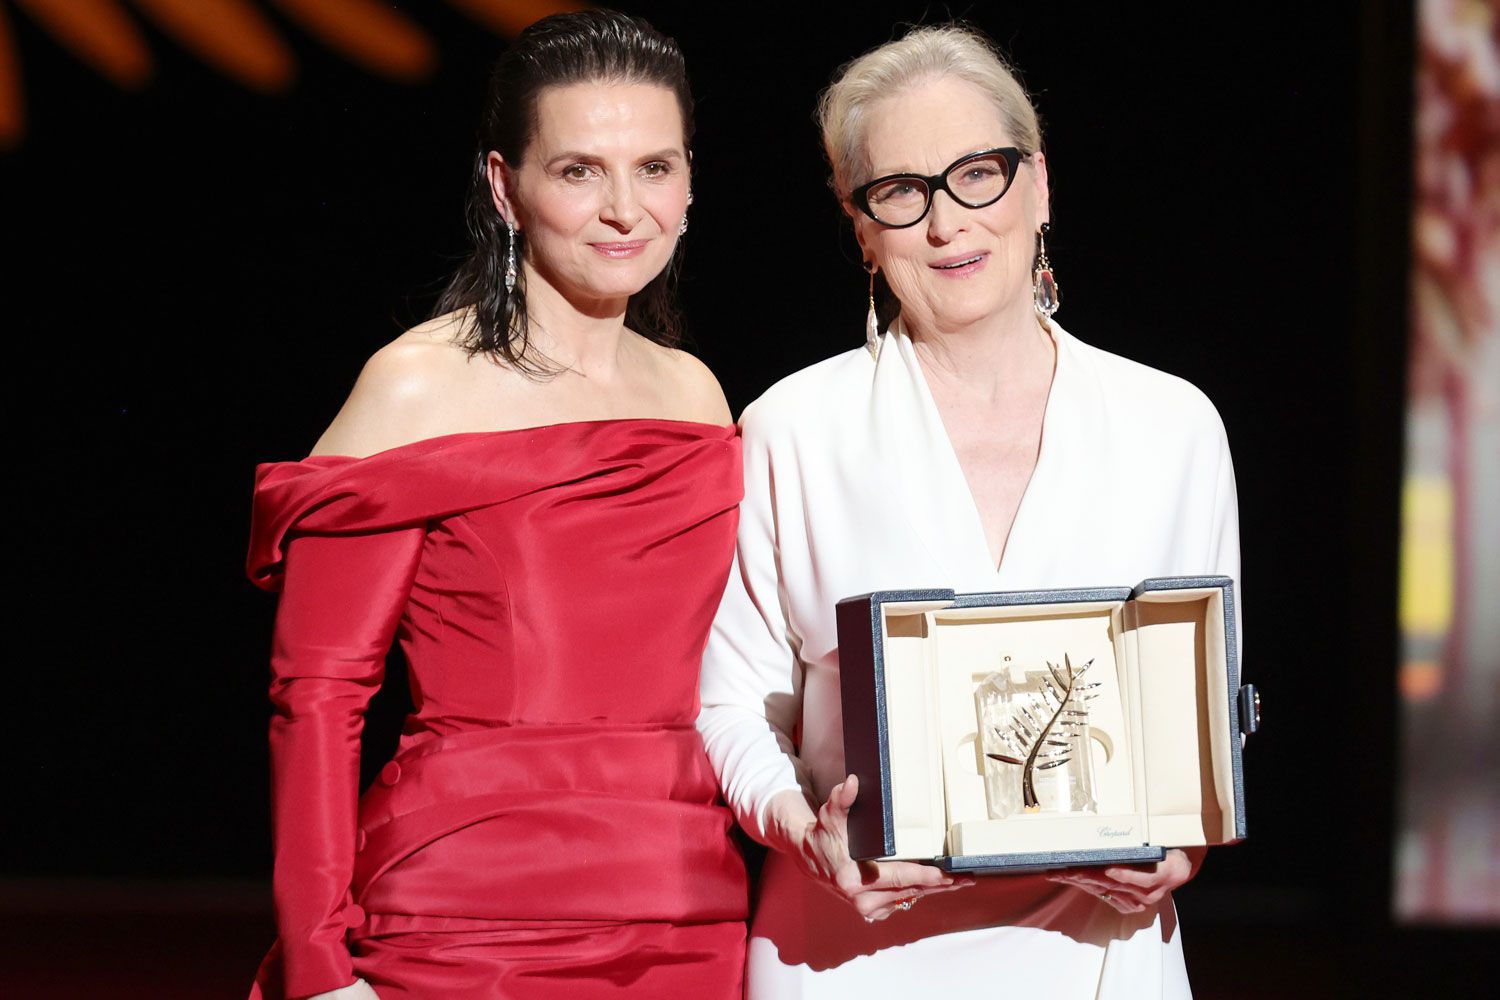 Meryl Streep Honored at Cannes Film Festival with Palme d’or: Highlights [Video]